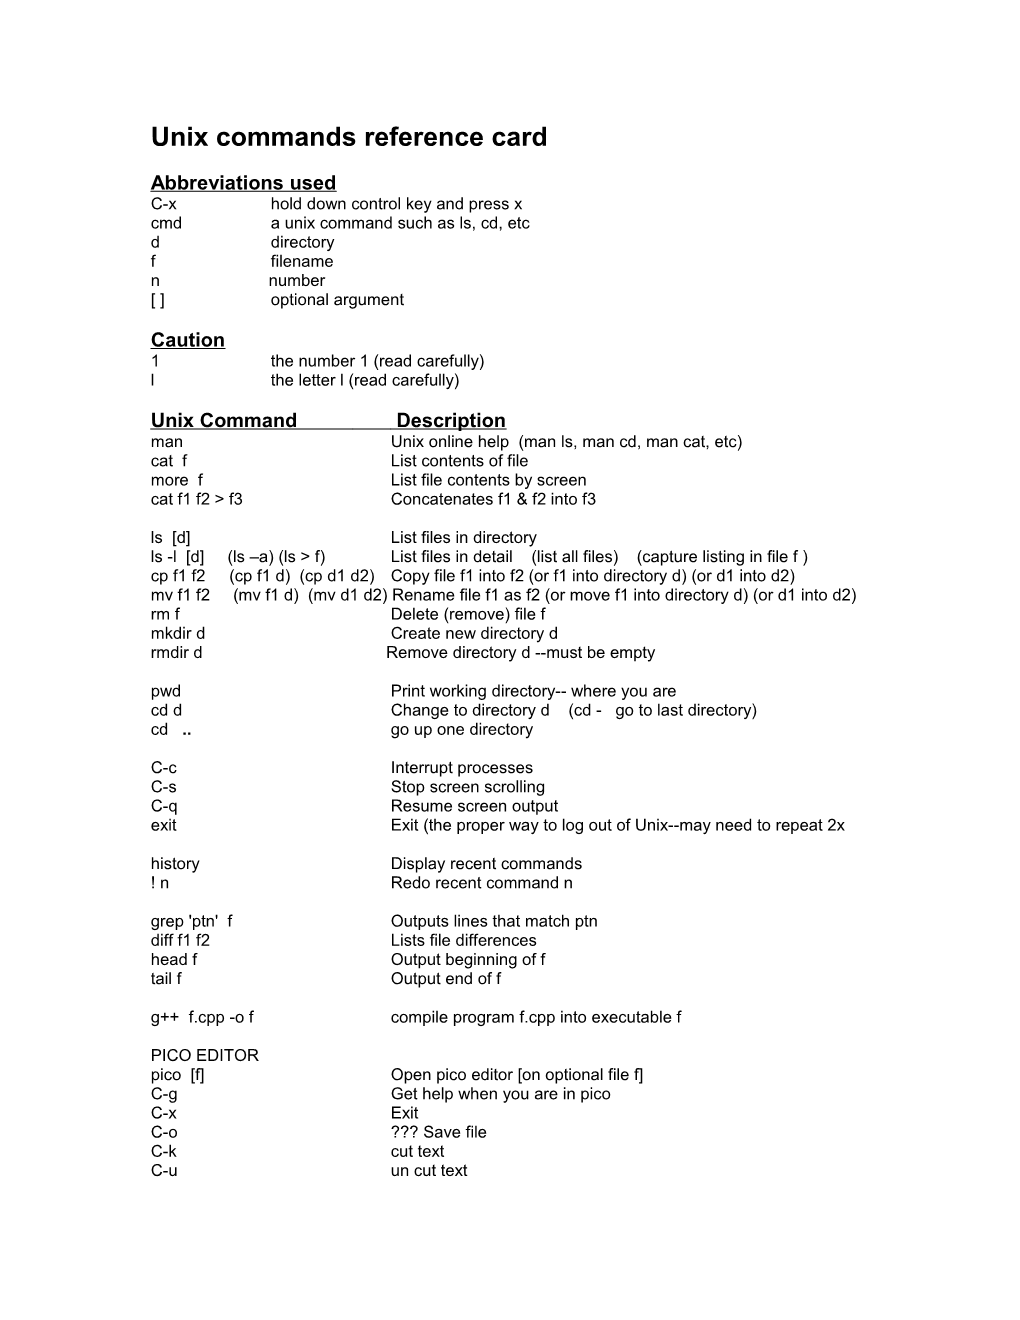 Unix Commands Reference Card